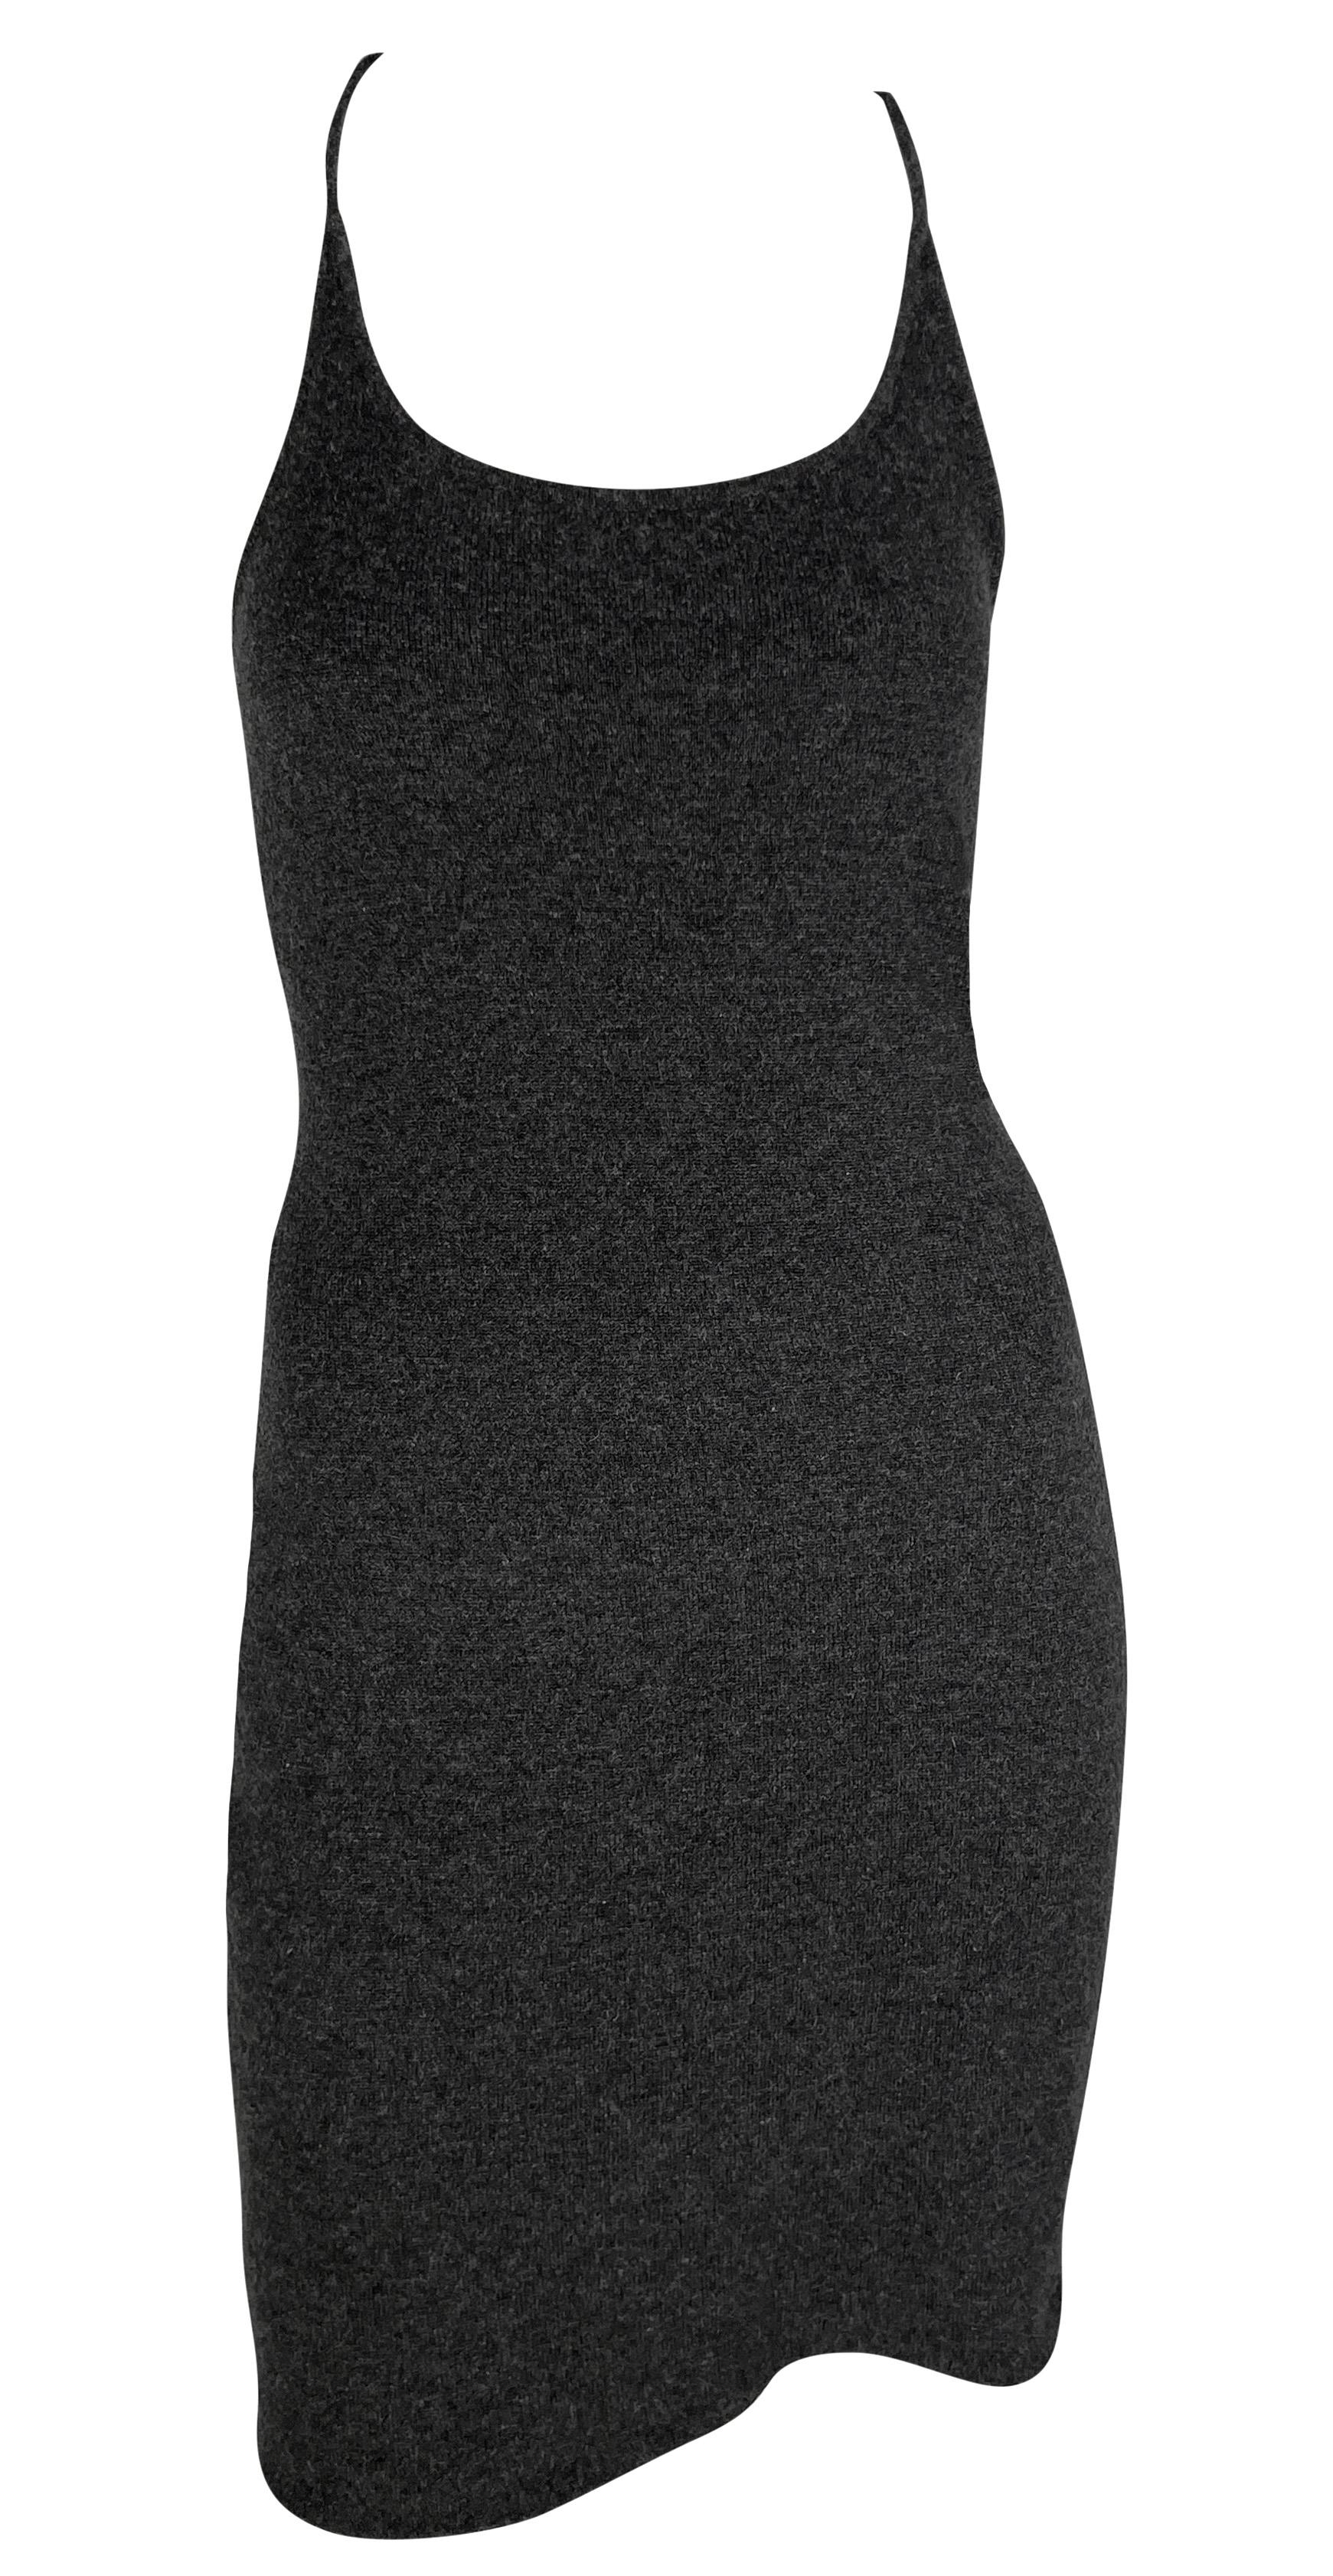 1990s Ralph Lauren Cashmere Knit Backless Charcoal Grey Bodycon Mini Dress For Sale 1